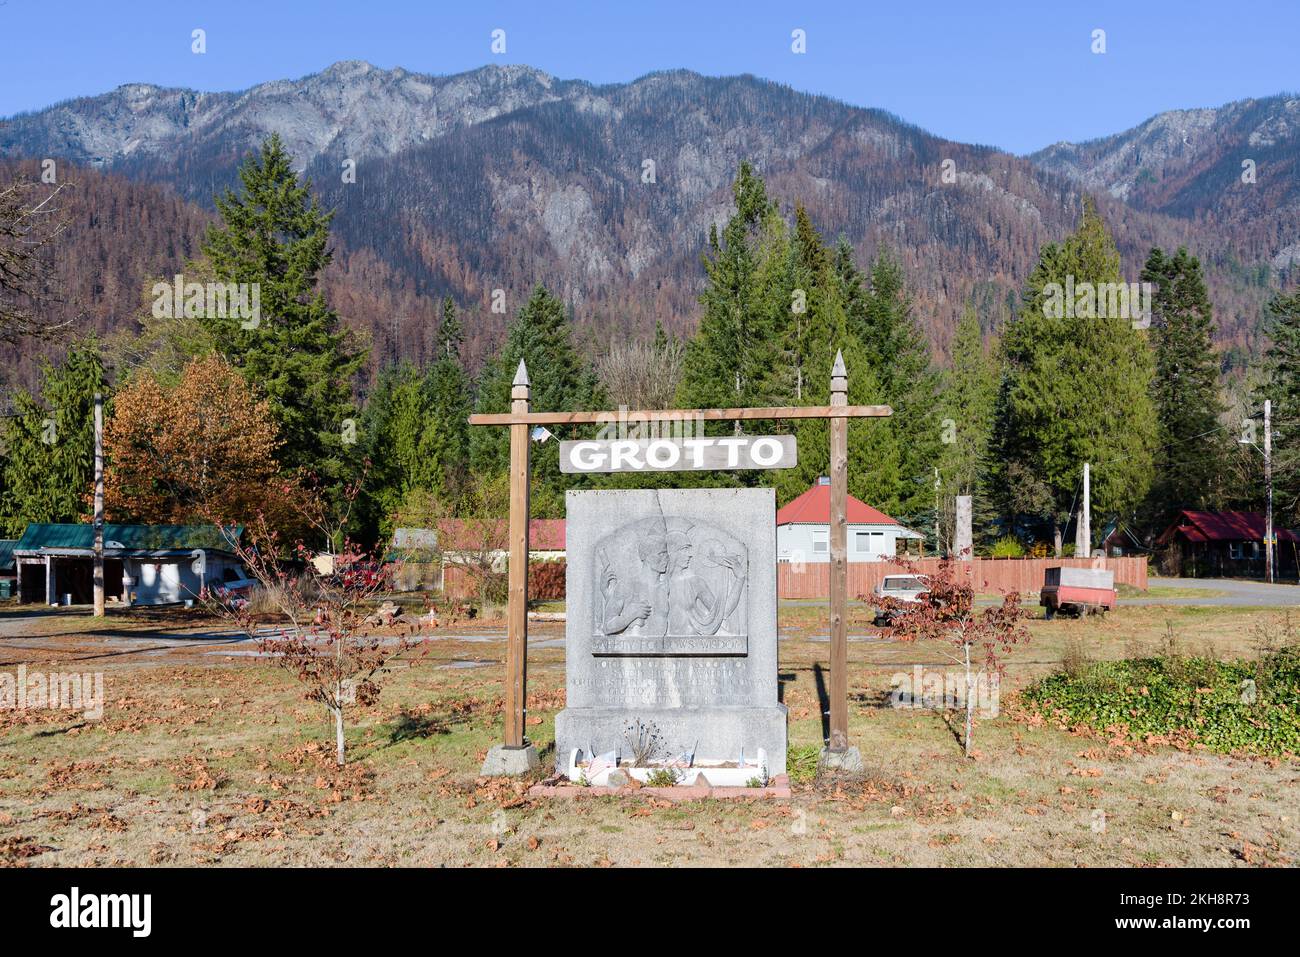 Grotto, WA, USA - November 18, 2022; Sign for community of Grotto in front of Bolt Creek Fire scar of mountain above Stock Photo